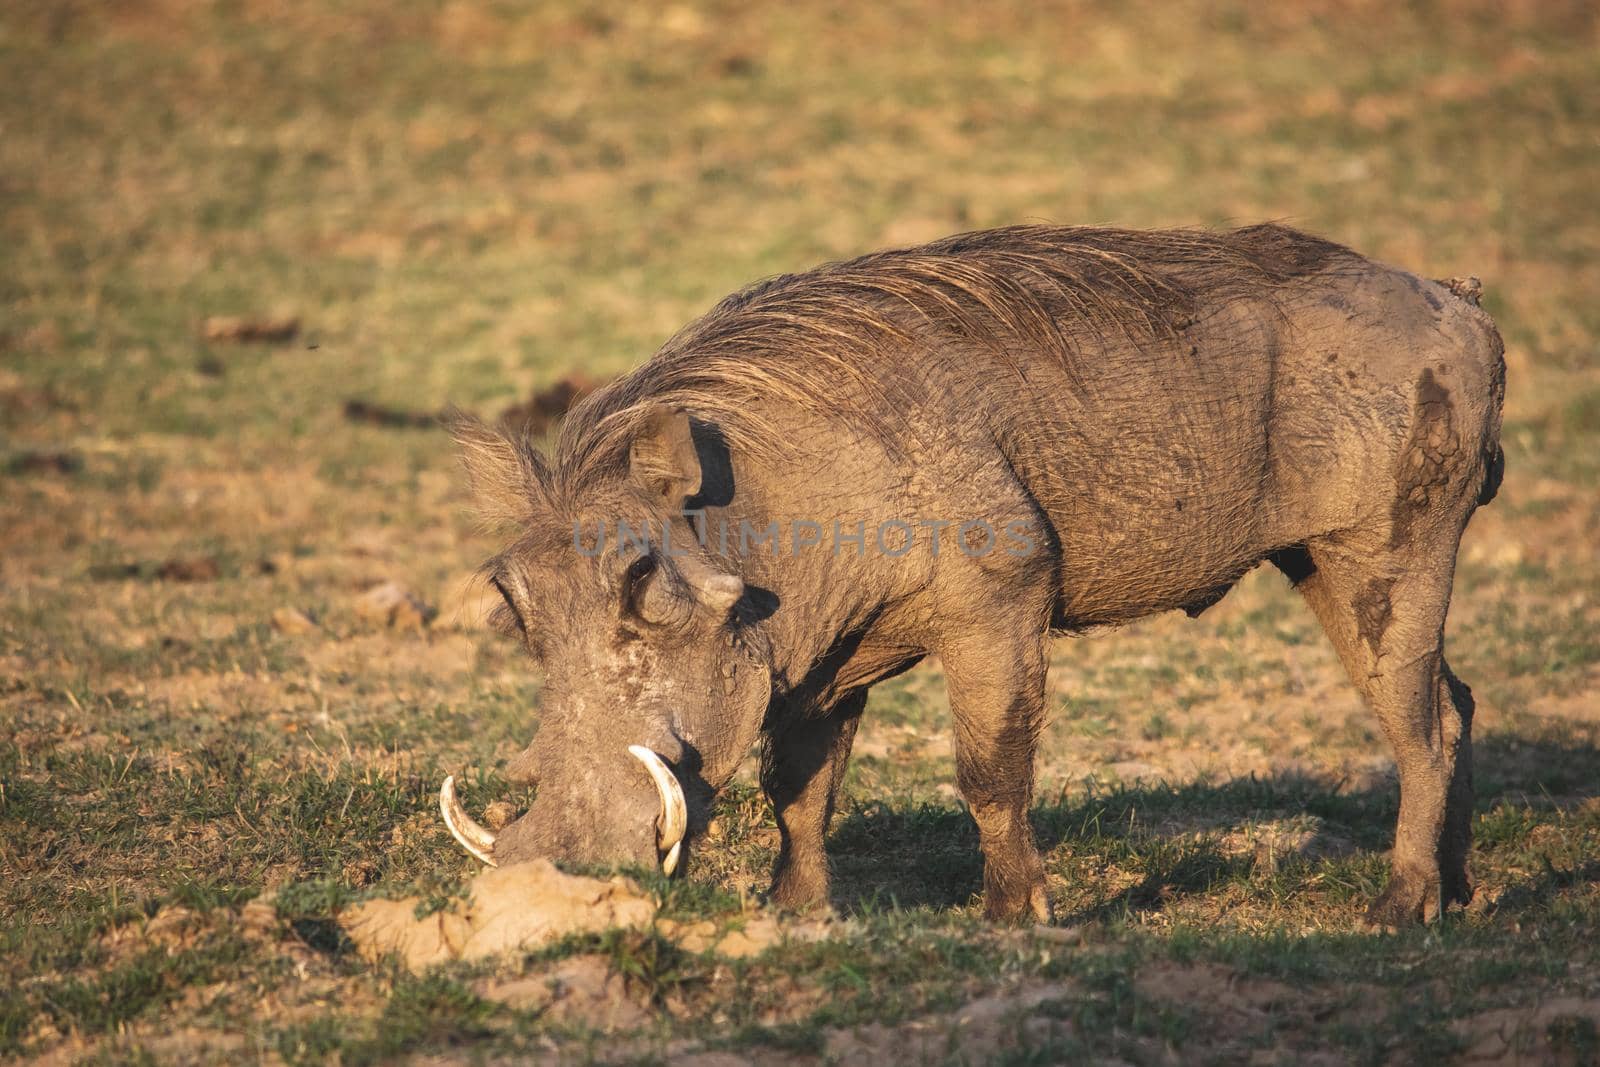 A close-up of a huge warthog eating in the savanna